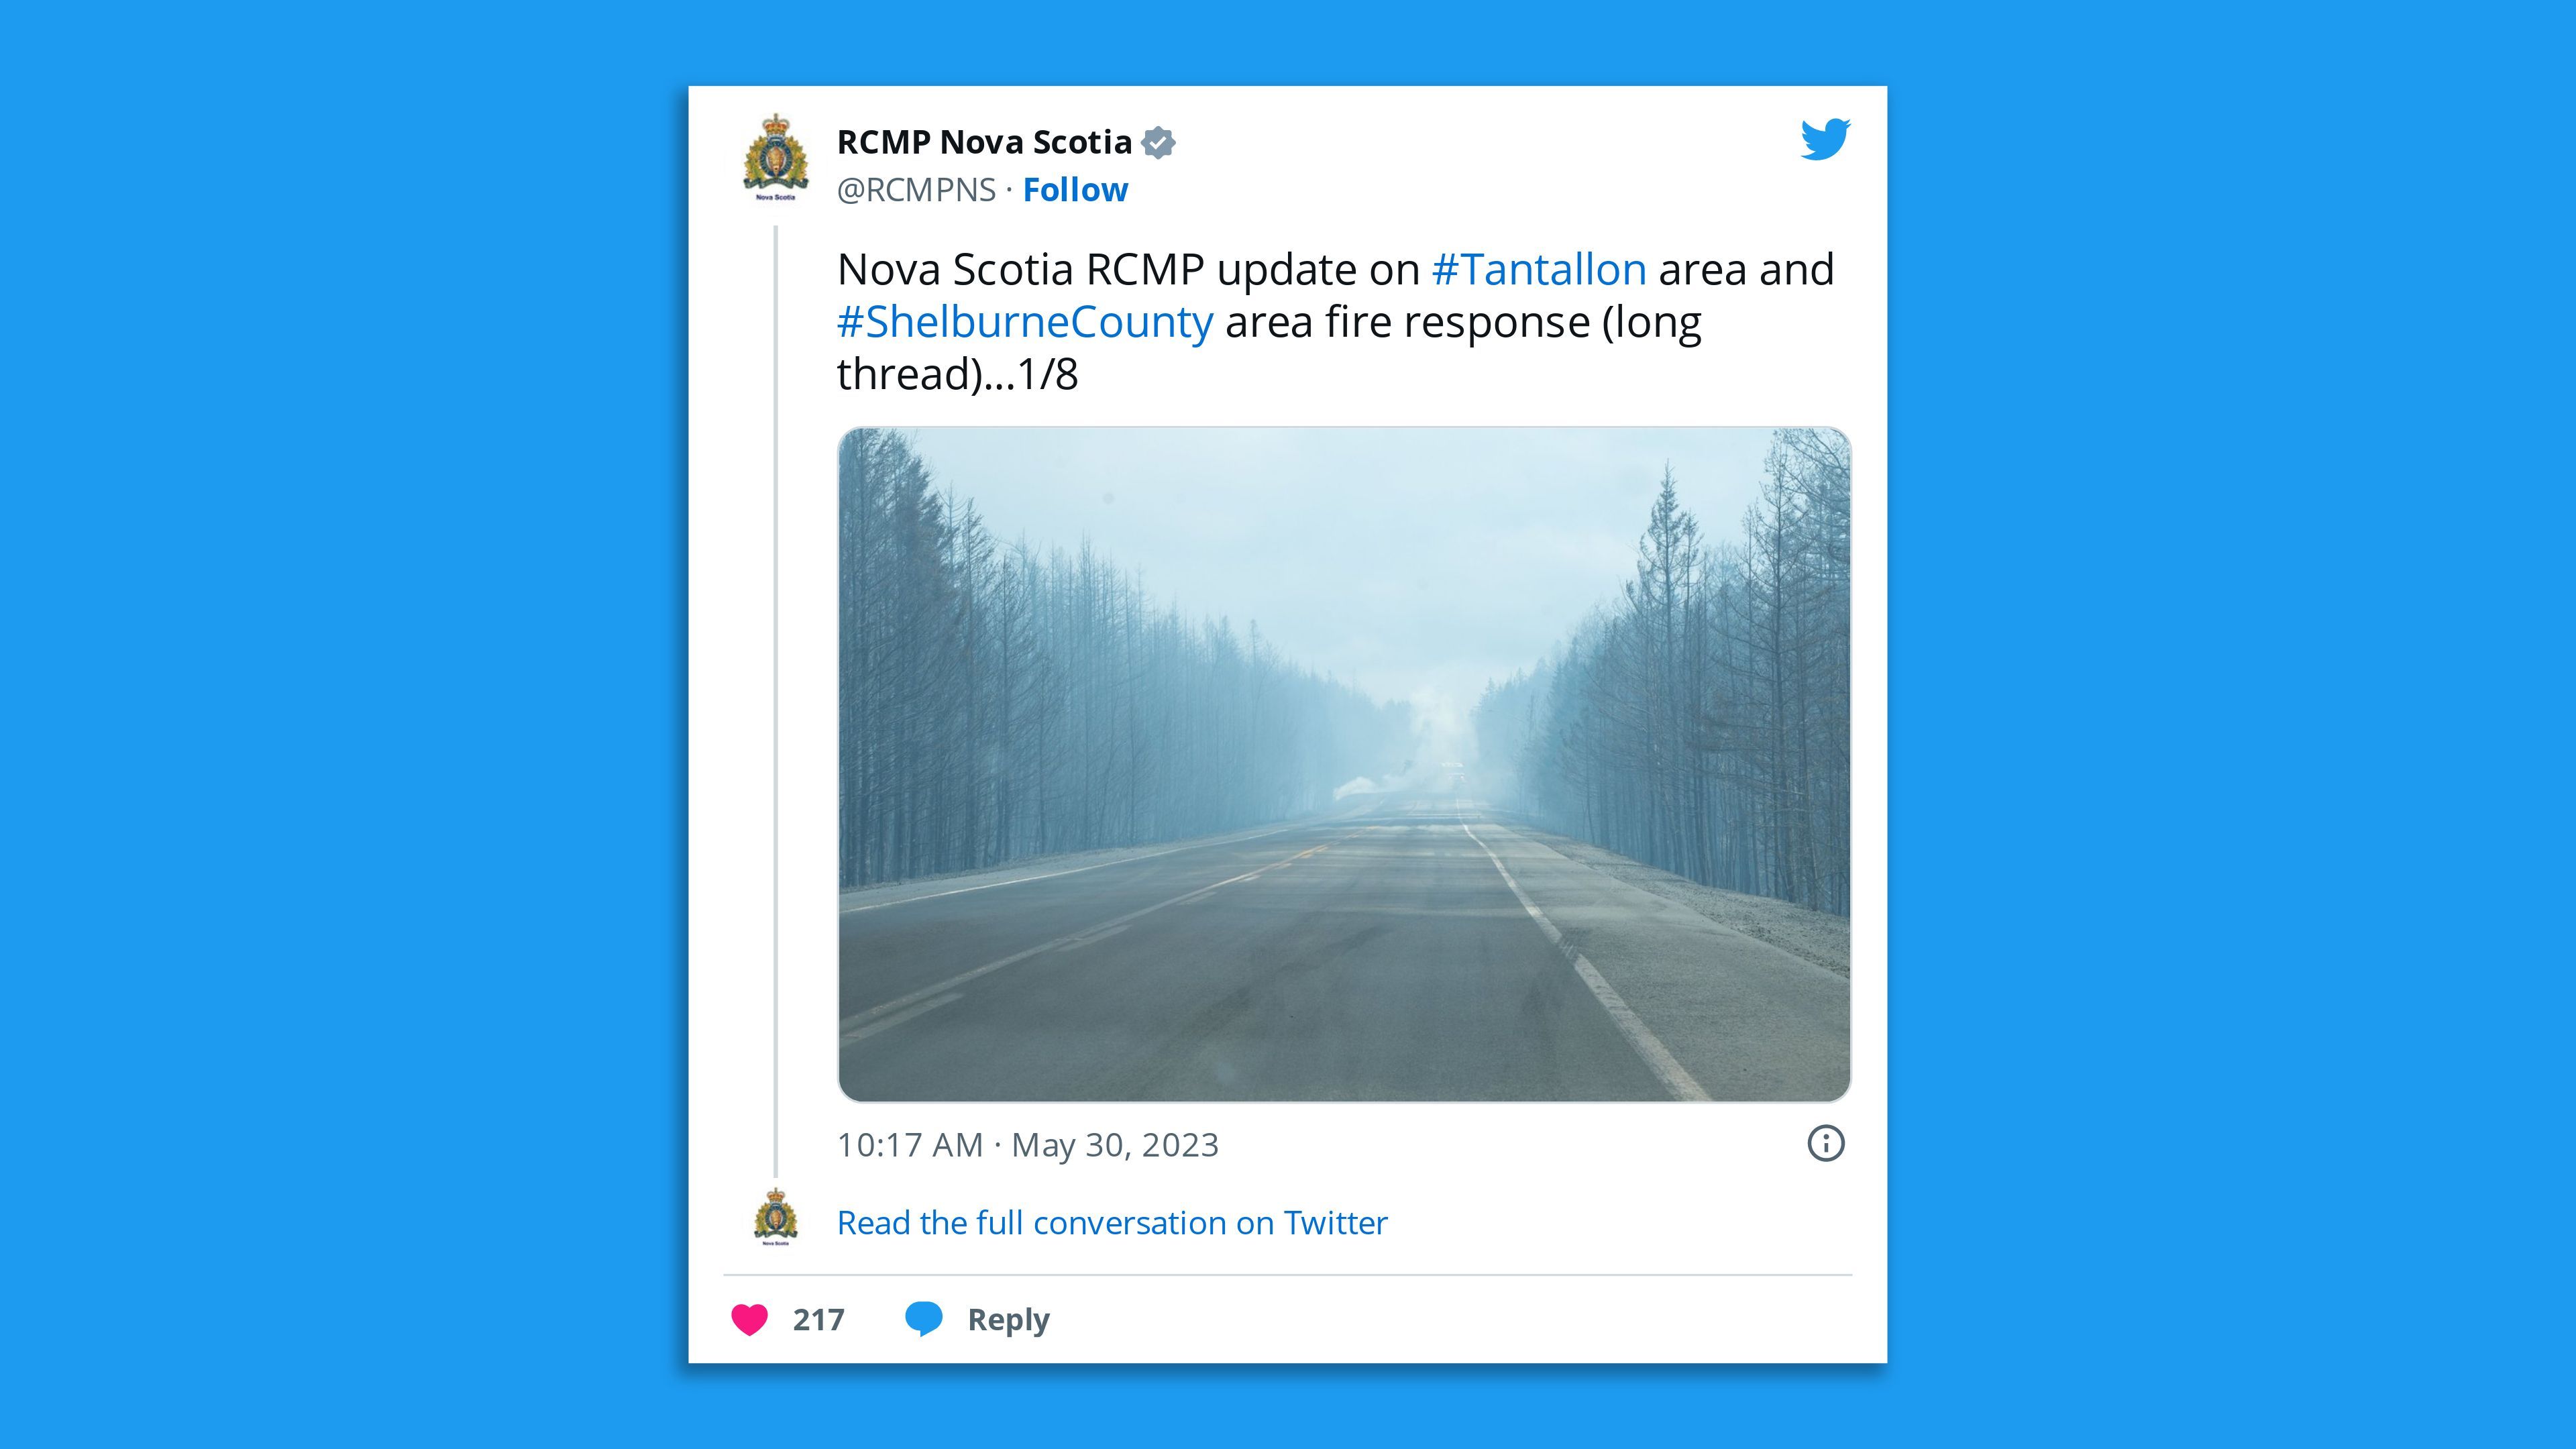 A screenshot of a Royal Canadian Mounted Police Nova Scotia photo tweet showing a smoke-filled road lined by forest trees.